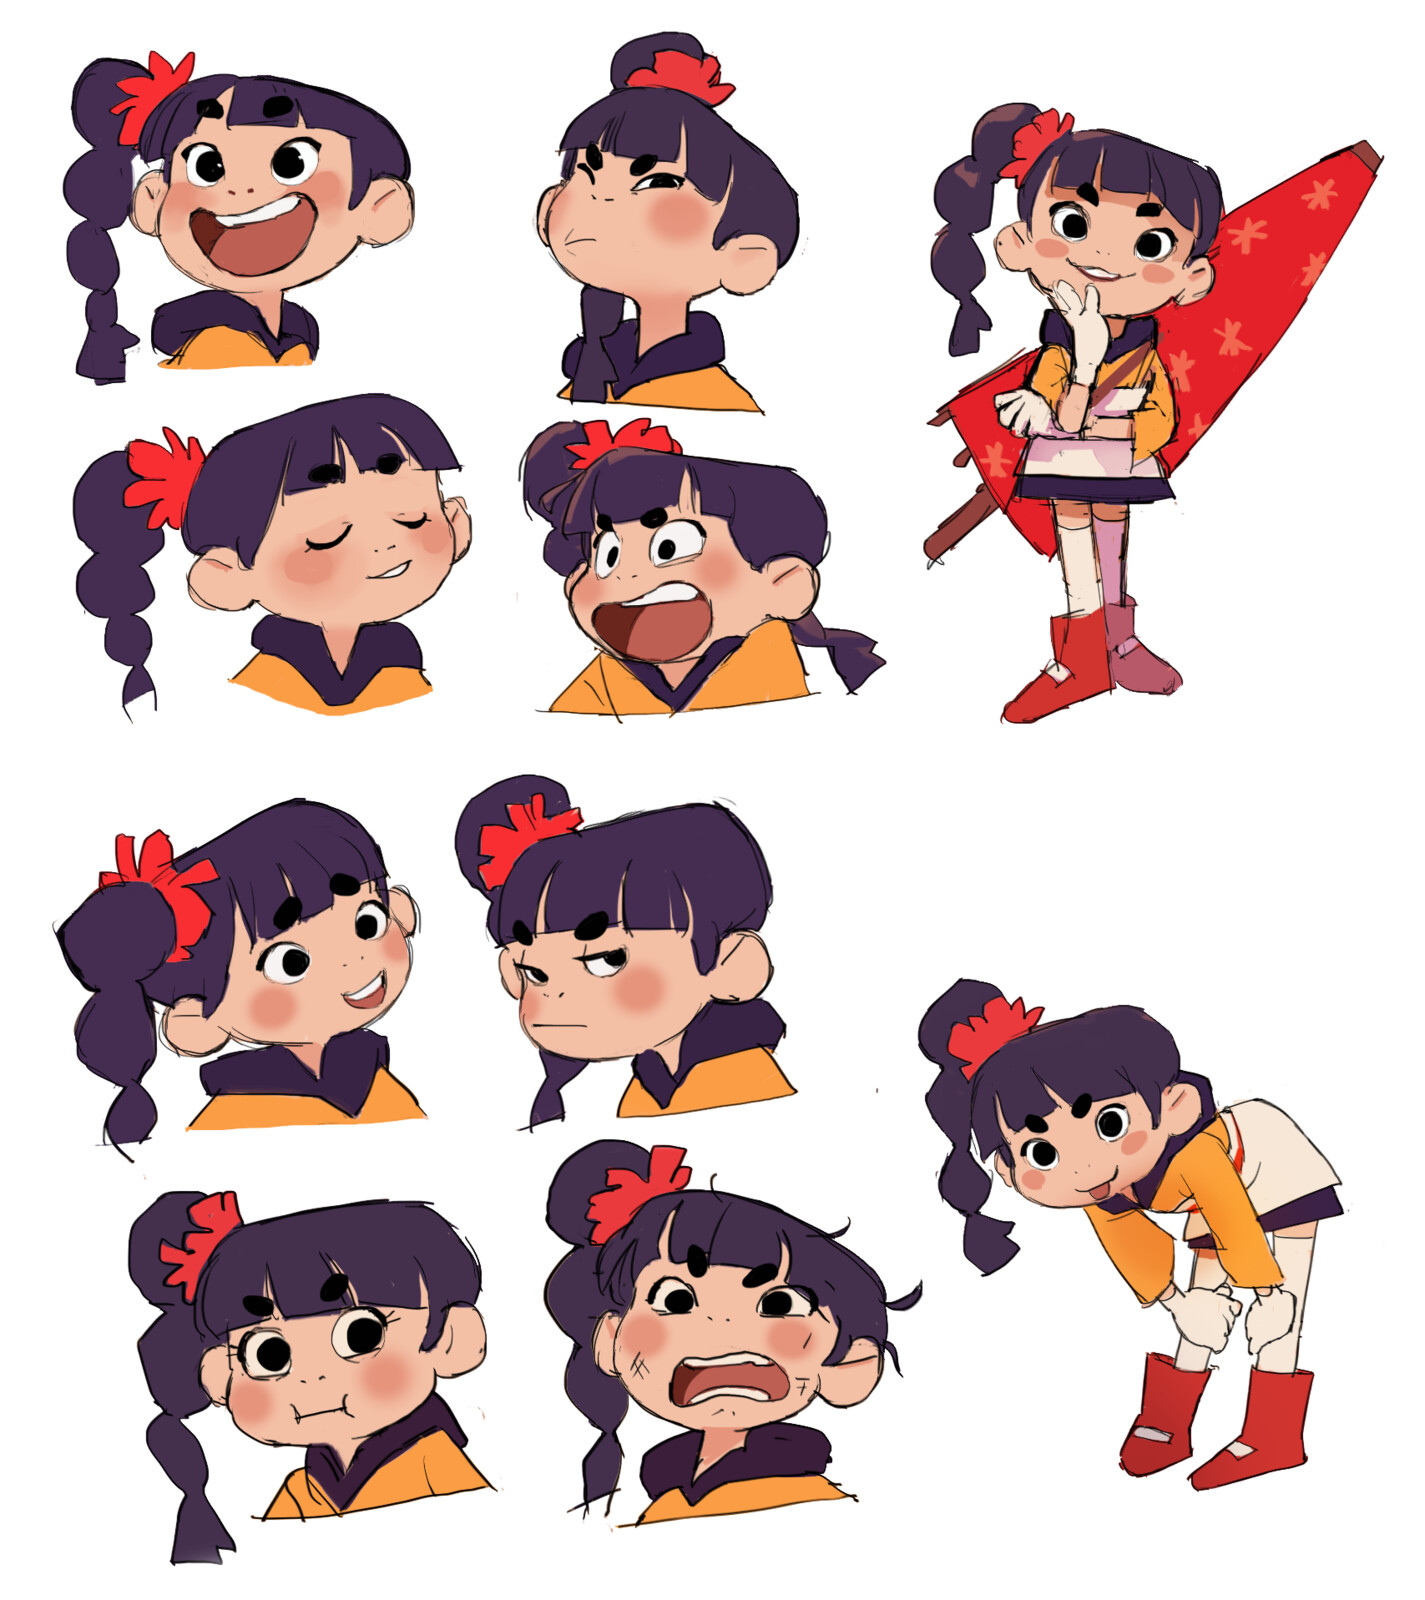 Lingling's expression sheet